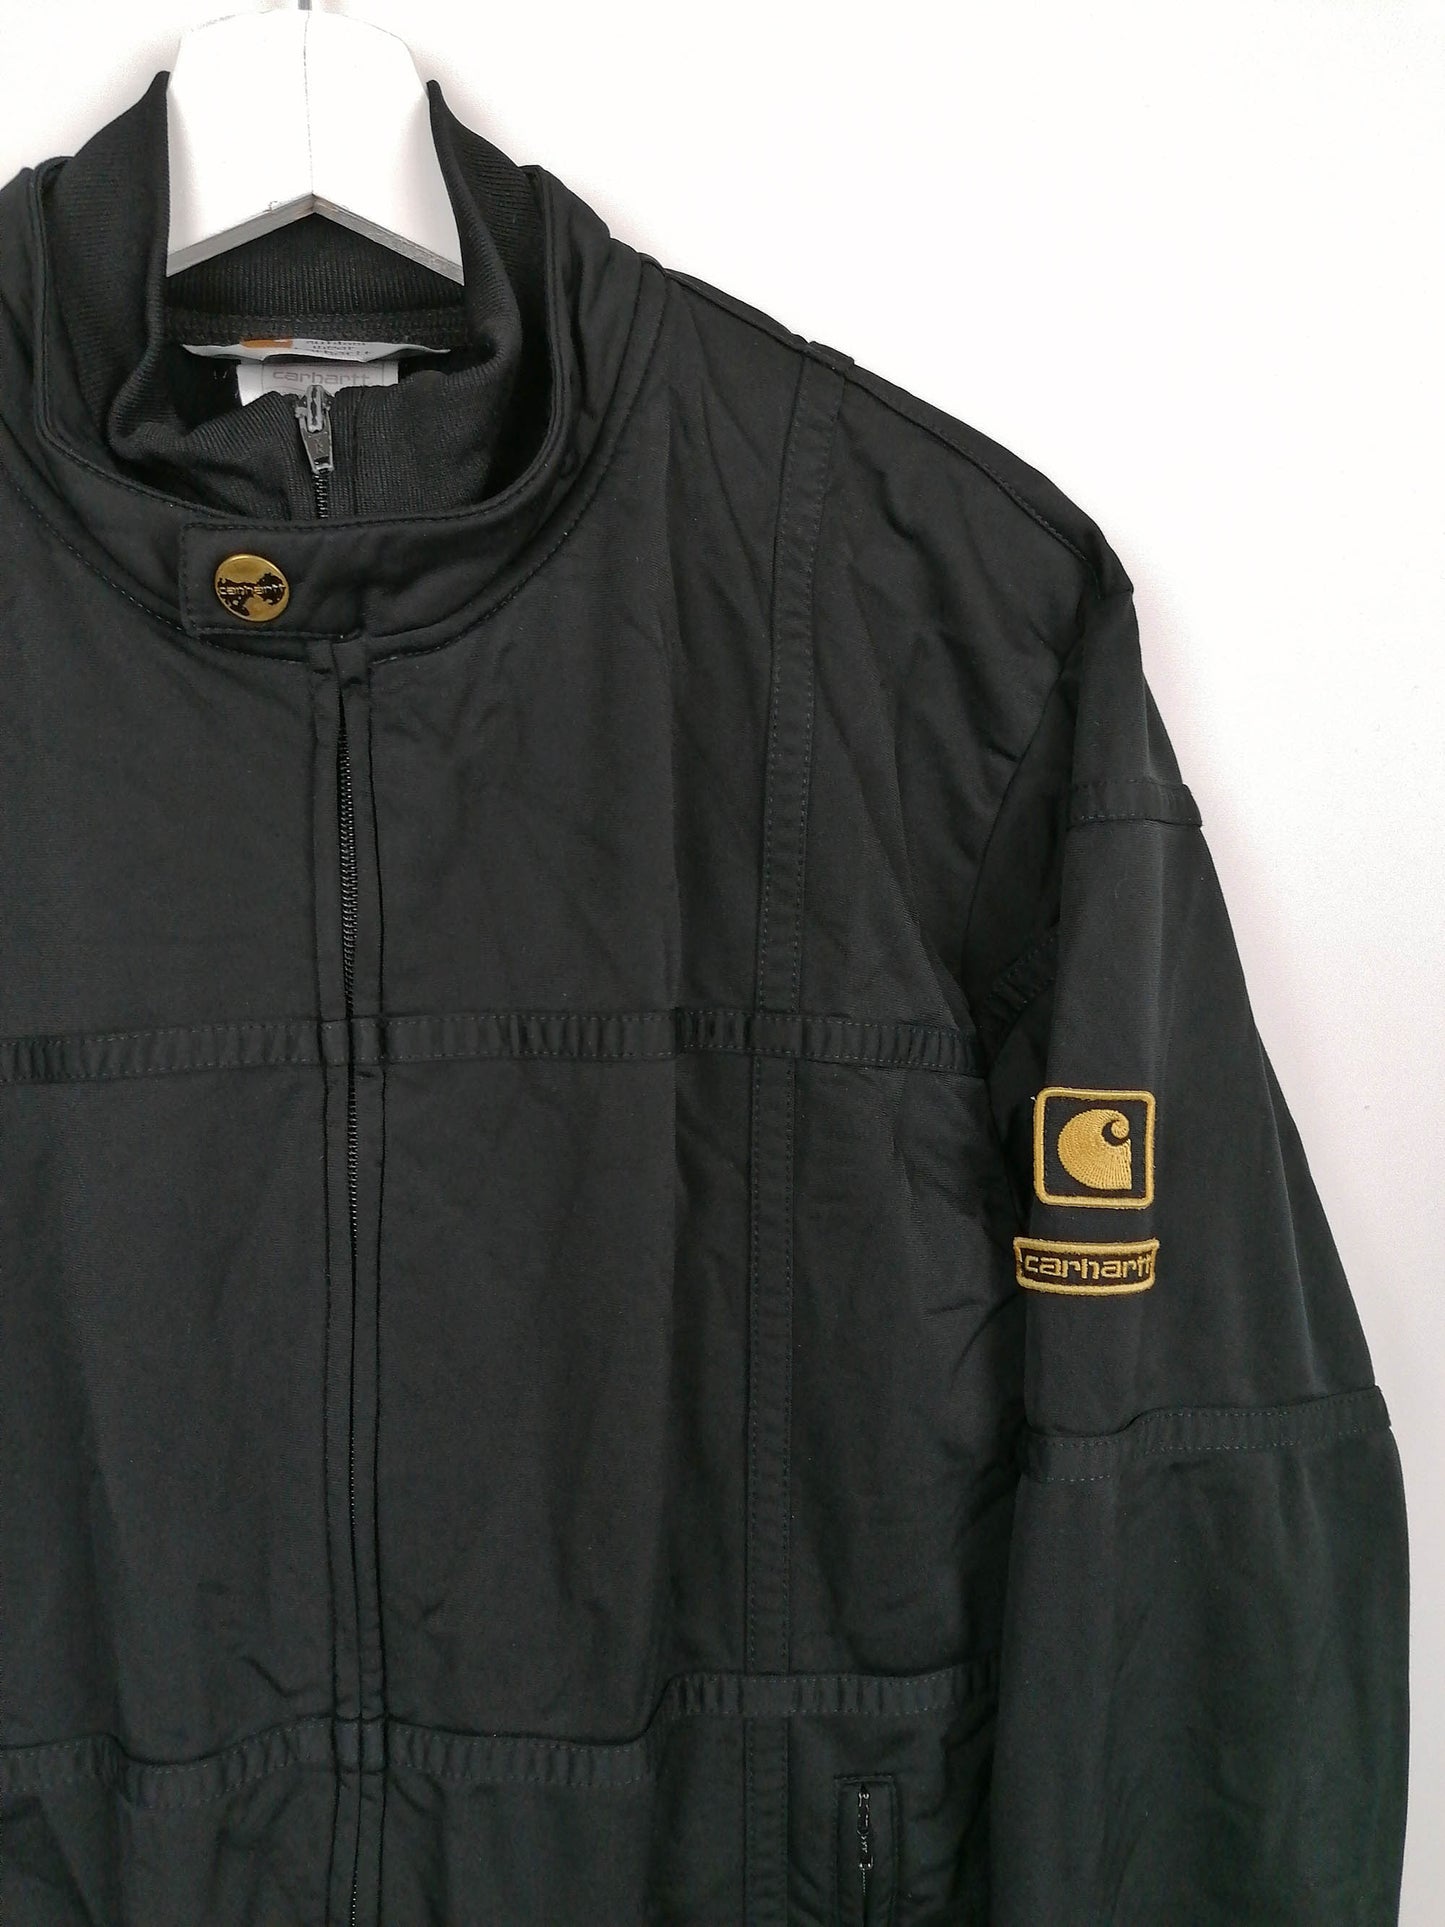 CARHARTT Rugged Outdoor Wear Track Jacket Polyester Black - size M-L